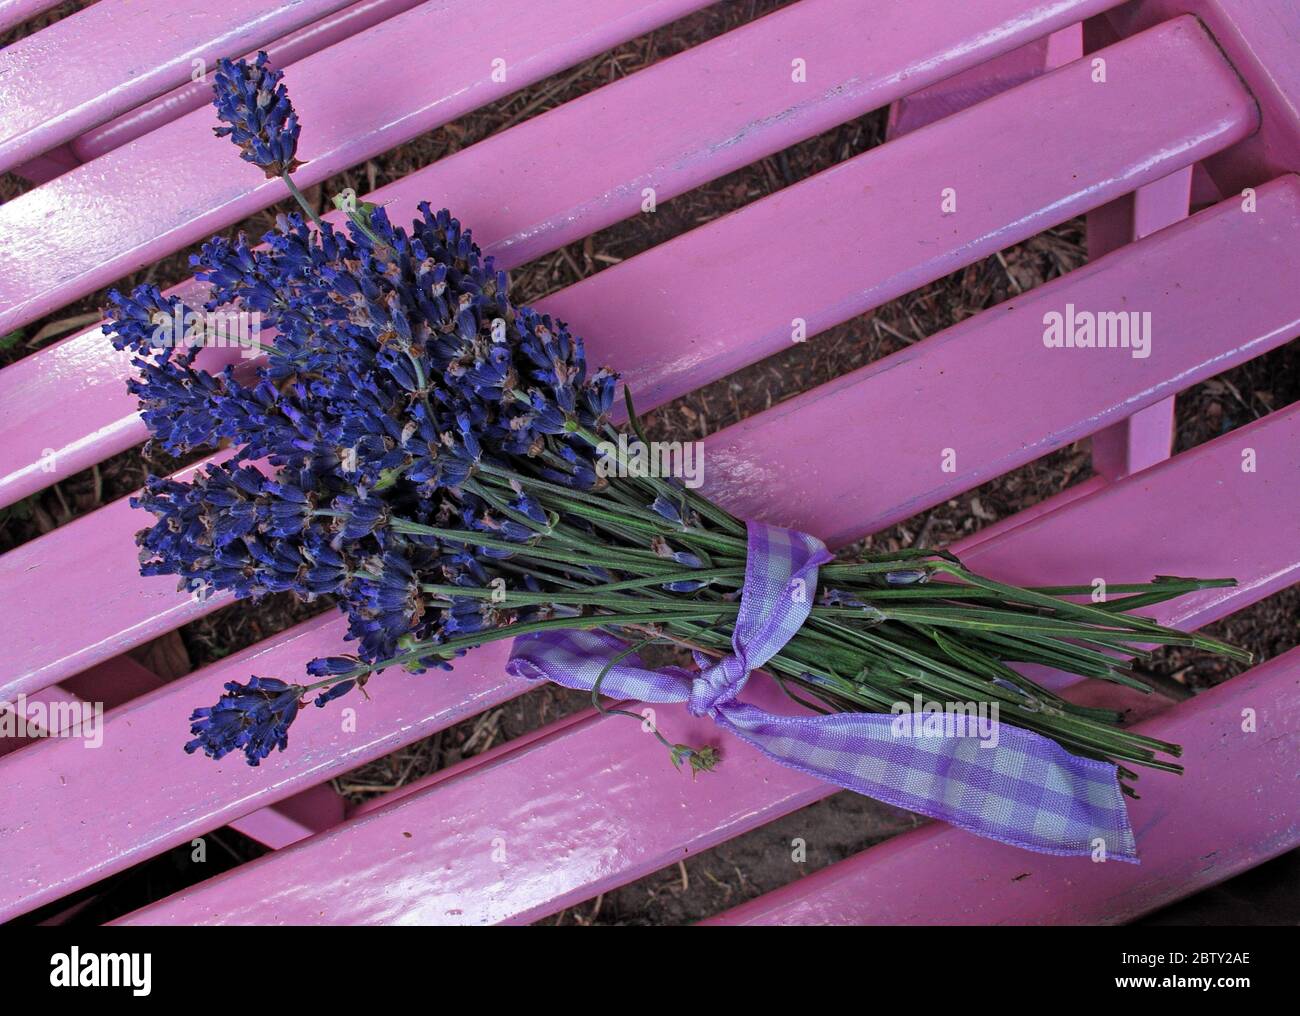 Bunch of purple lavender on a pink bench Stock Photo